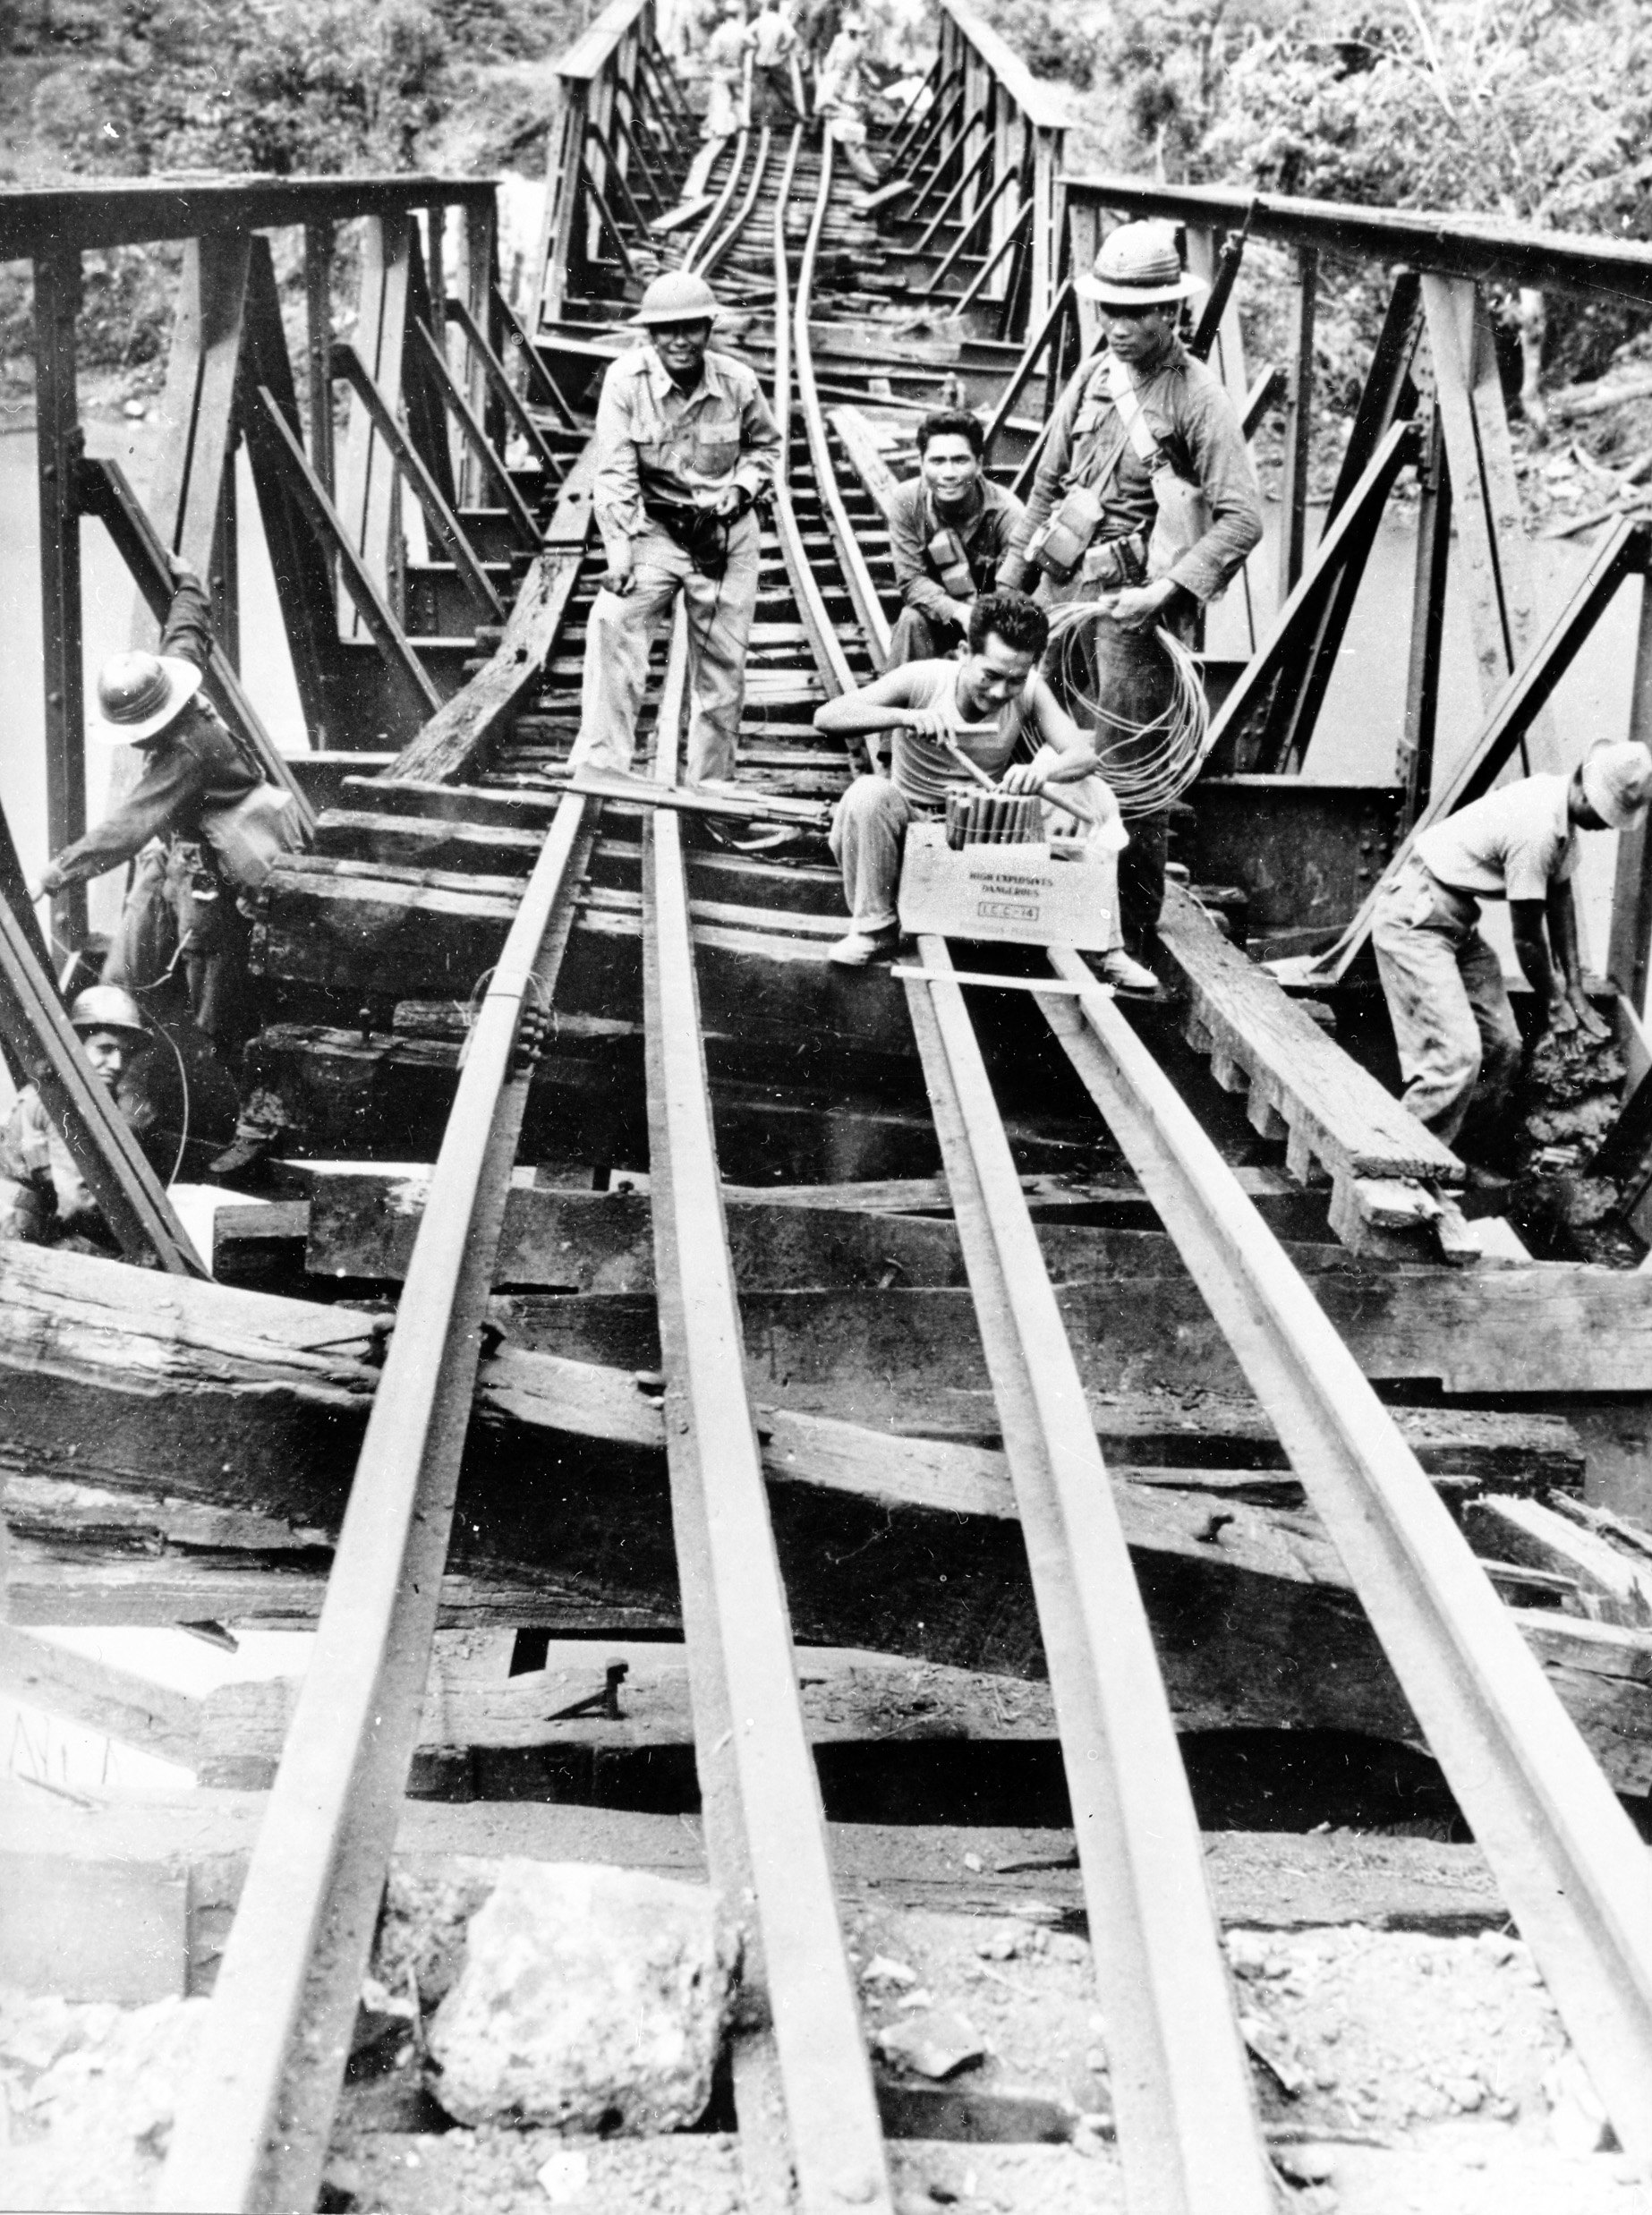 Preparing explosive charges, Filipino engineers rig a bridge on the island of Luzon for demolition after General Douglas MacArthur ordered such measures to impede the progress of the invading Japanese in the Philippines. Such measure sought time for the defenders to retire to Bataan and Corregidor.